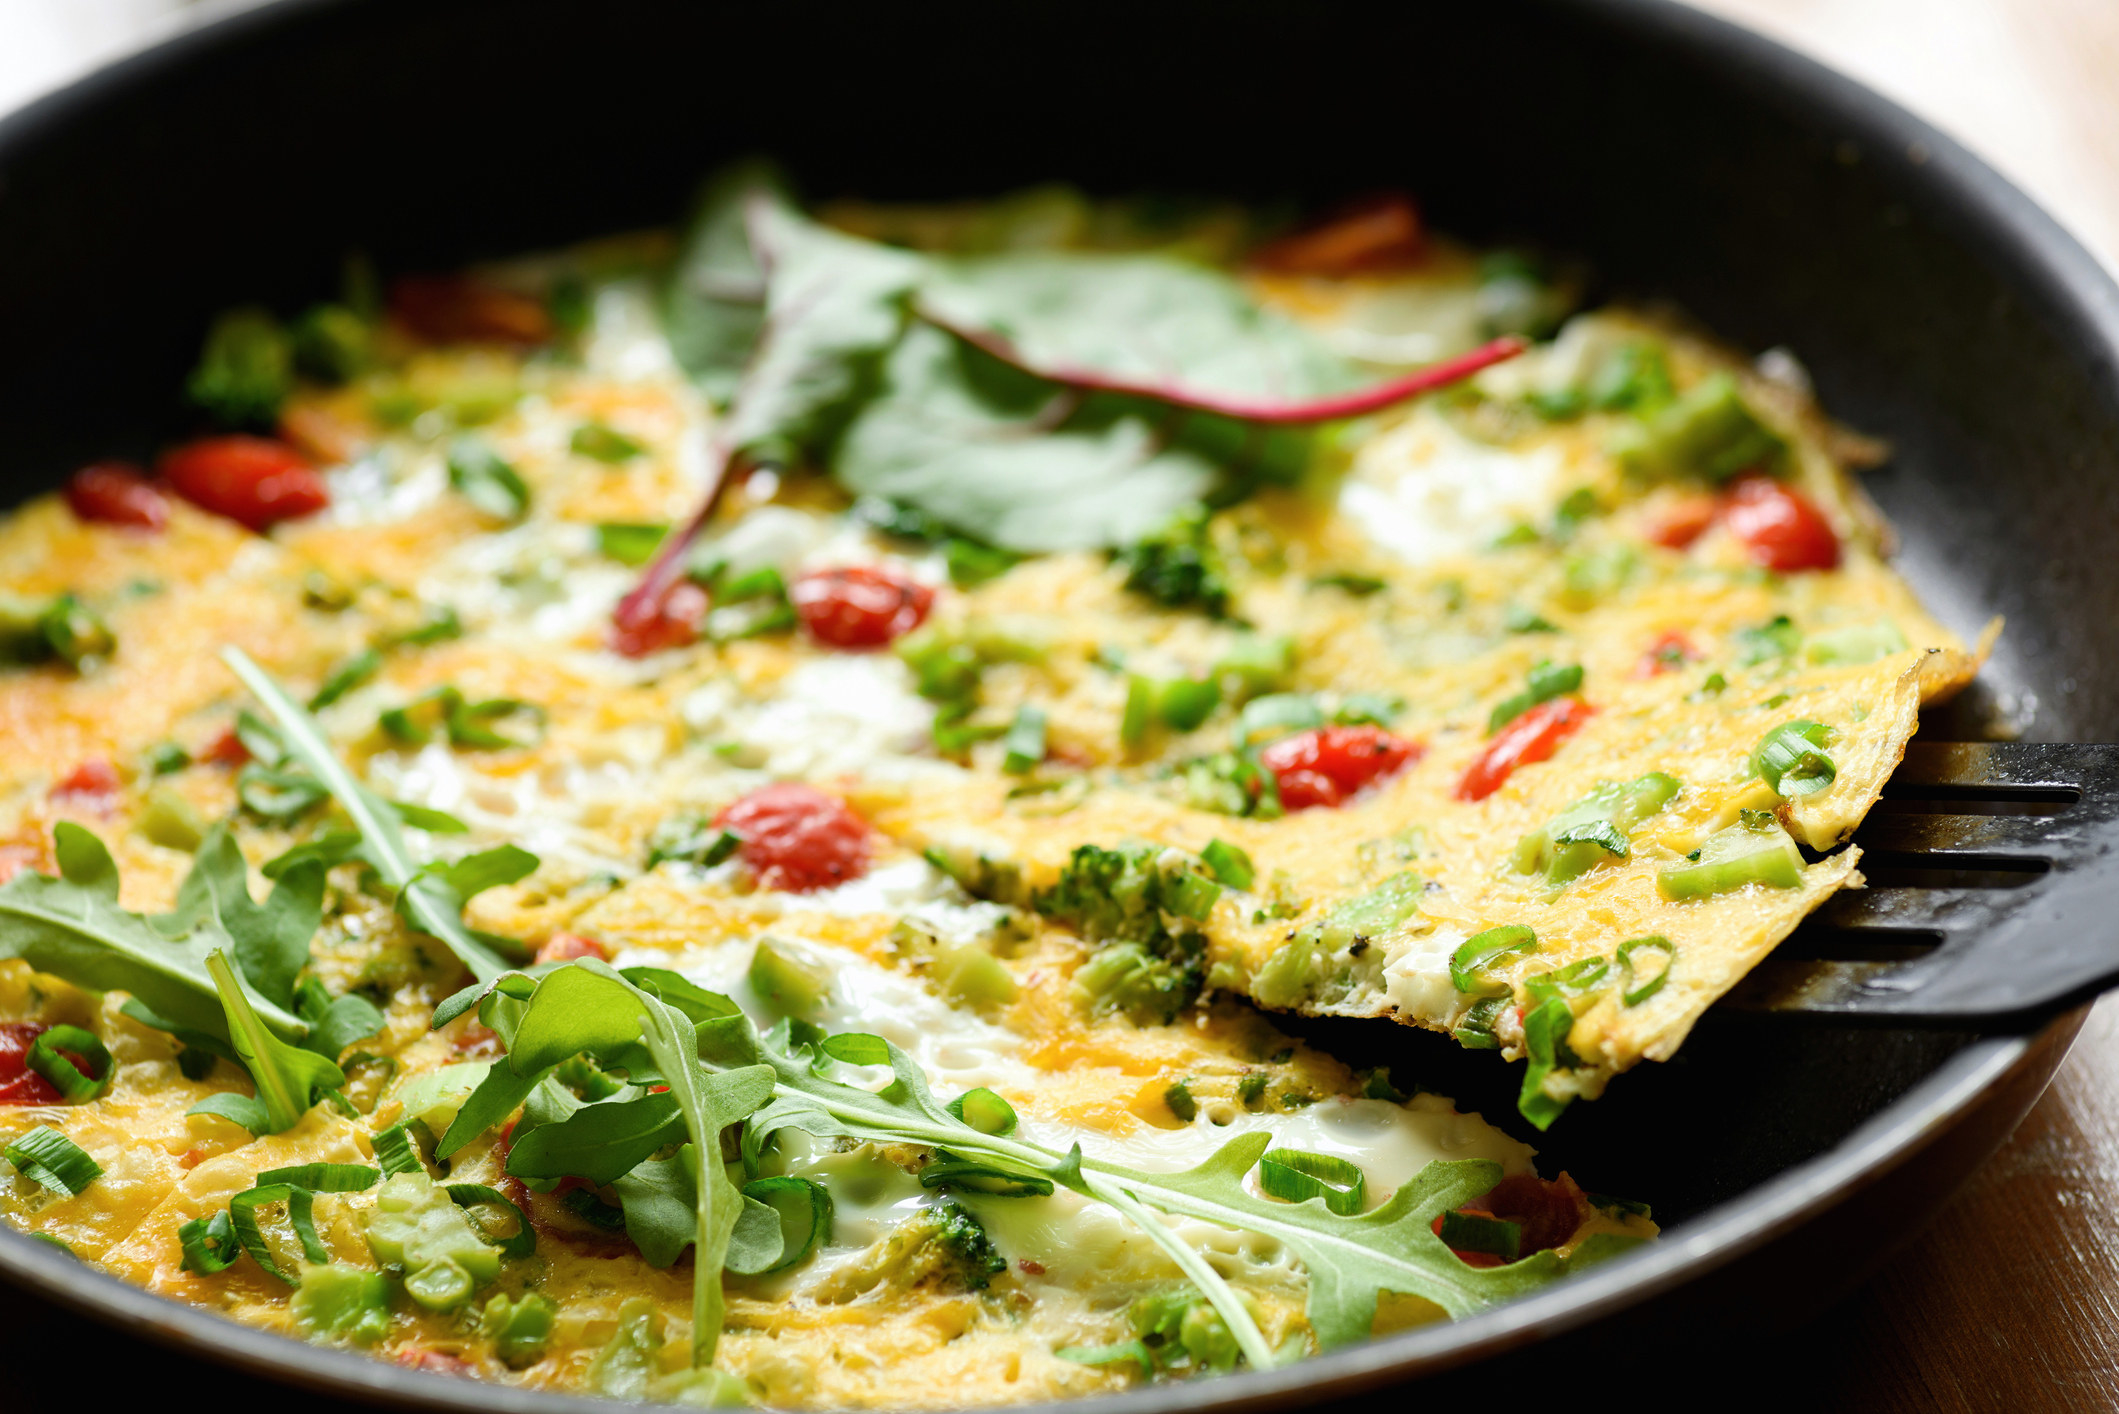 Frittata with cherry tomatoes, greens and cheese.